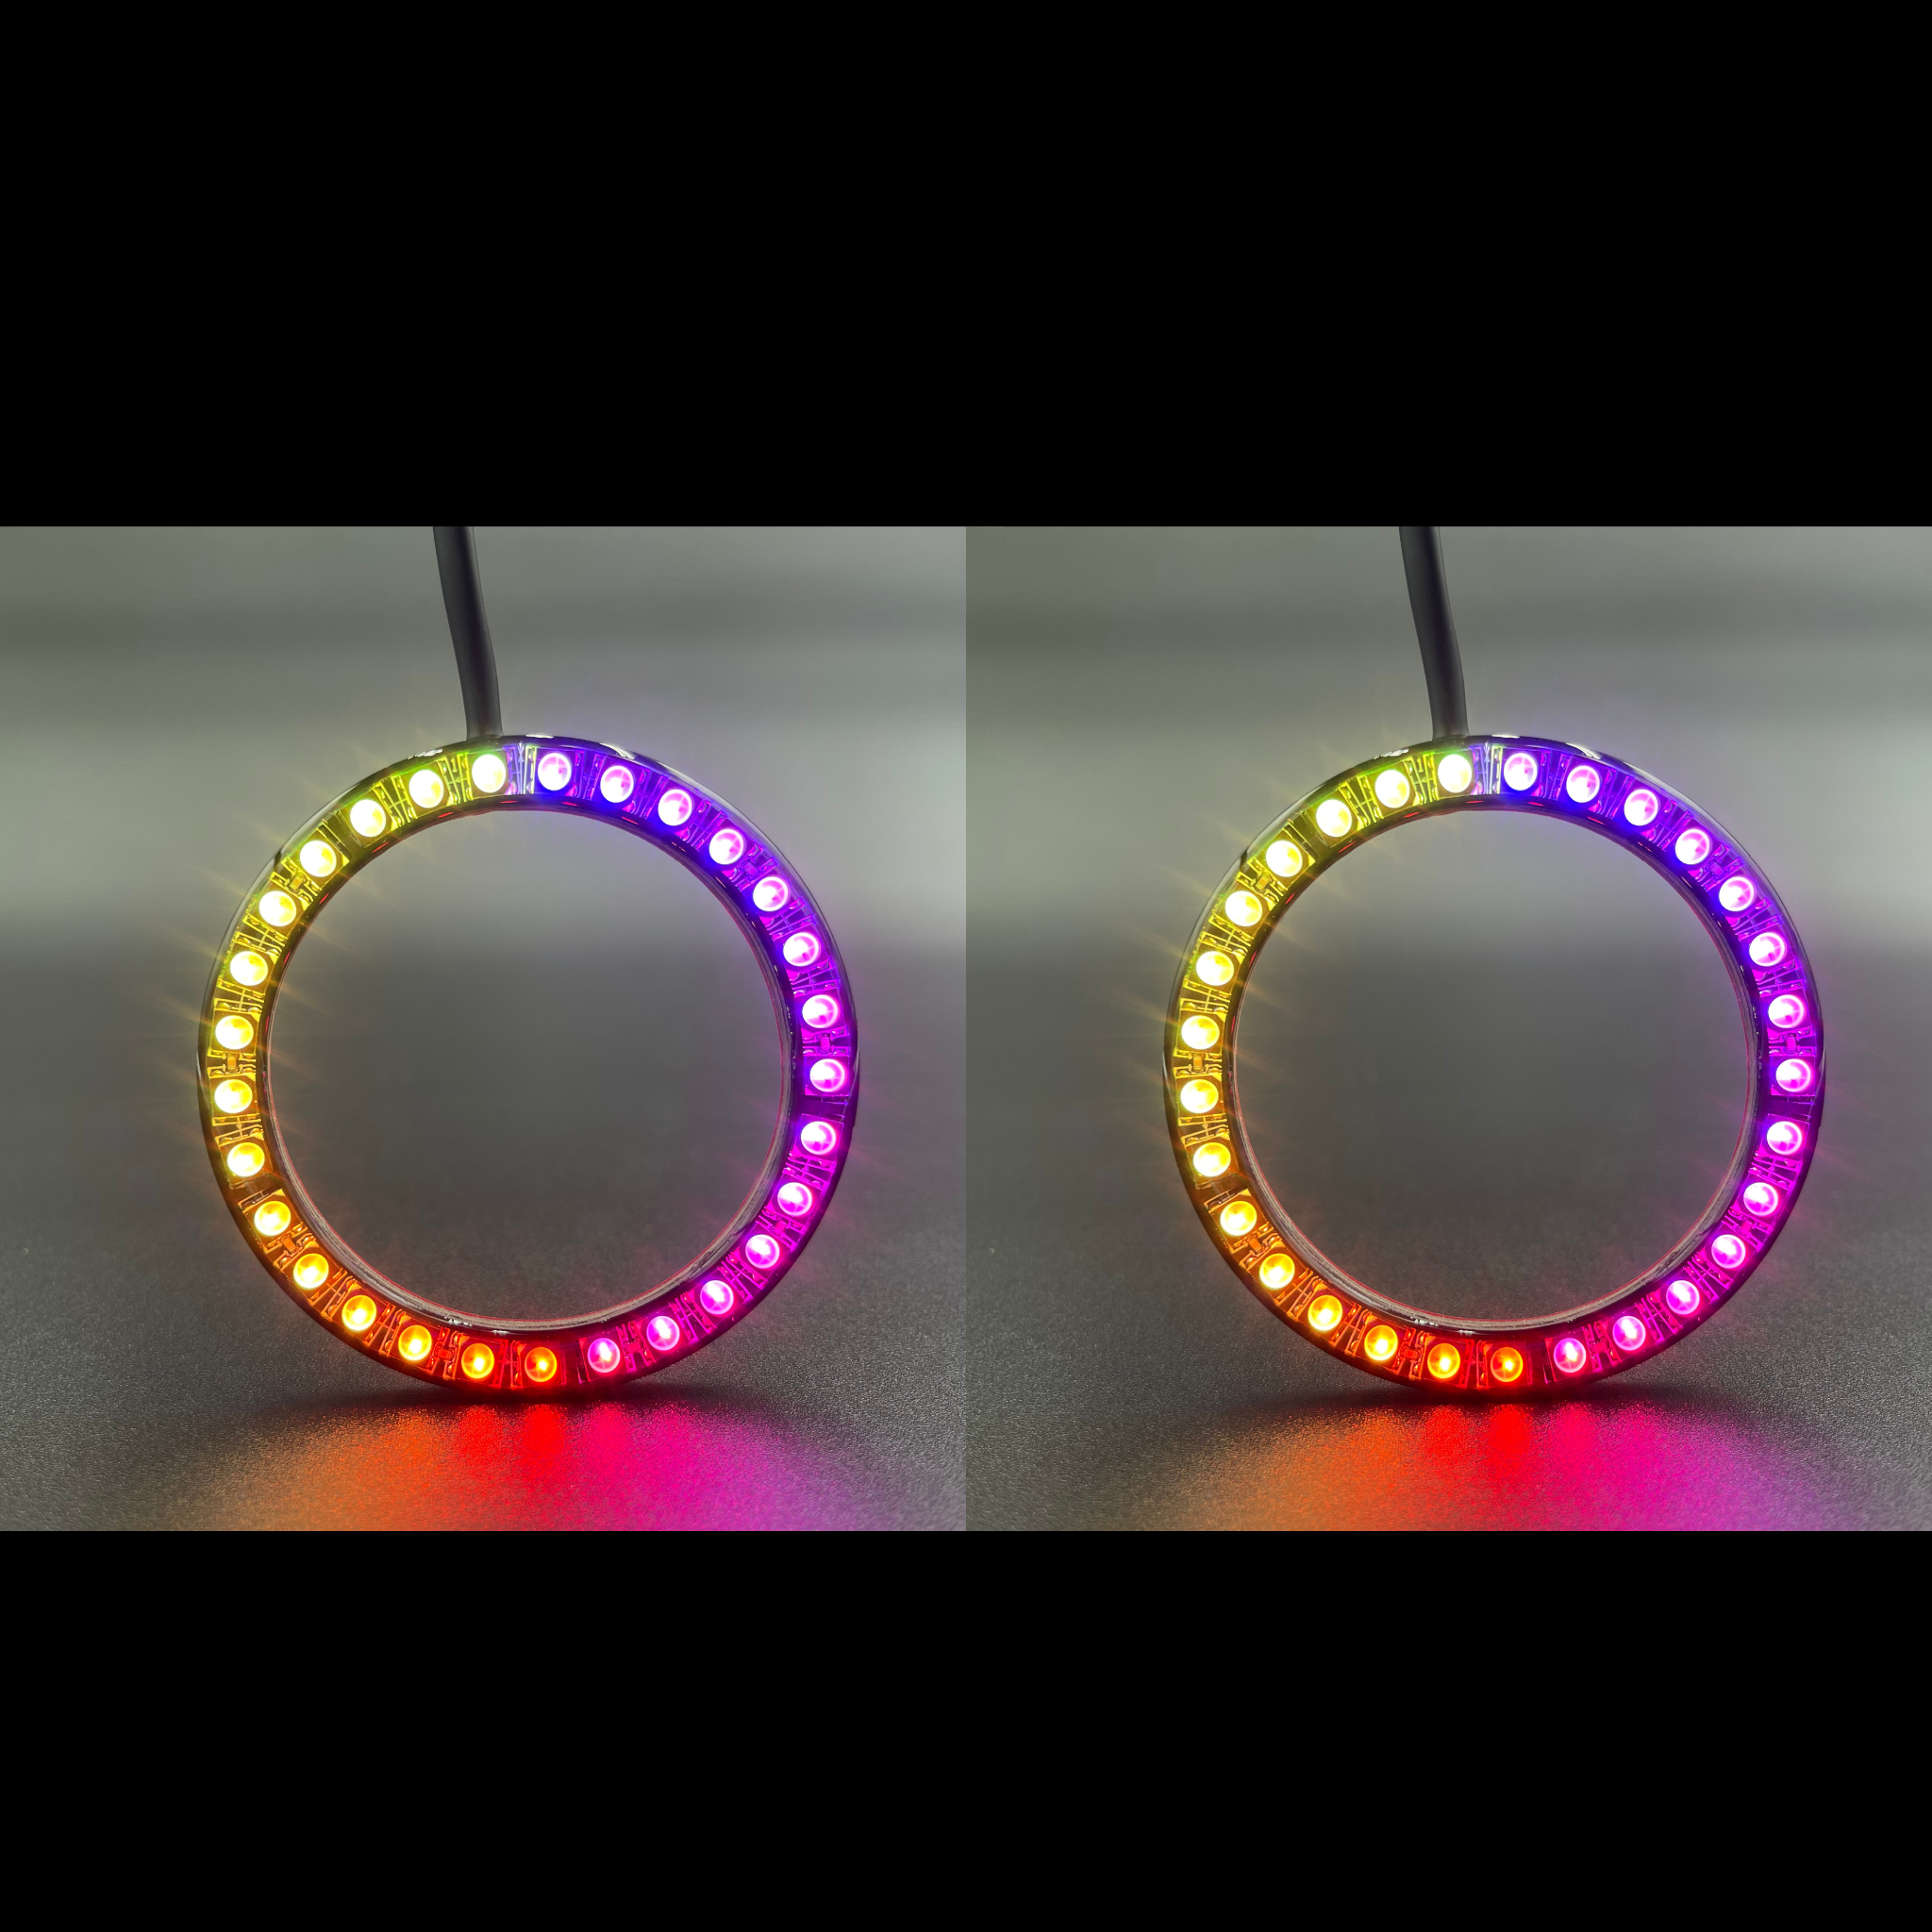 1994-2004 Ford F-250 Multicolor Halo Kit - RGB Halo Kits Multicolor Flow Series Color Chasing RGBWA LED headlight kit Oracle Lighting Trendz OneUpLighting Morimoto theretrofitsource AutoLEDTech Diode Dynamics